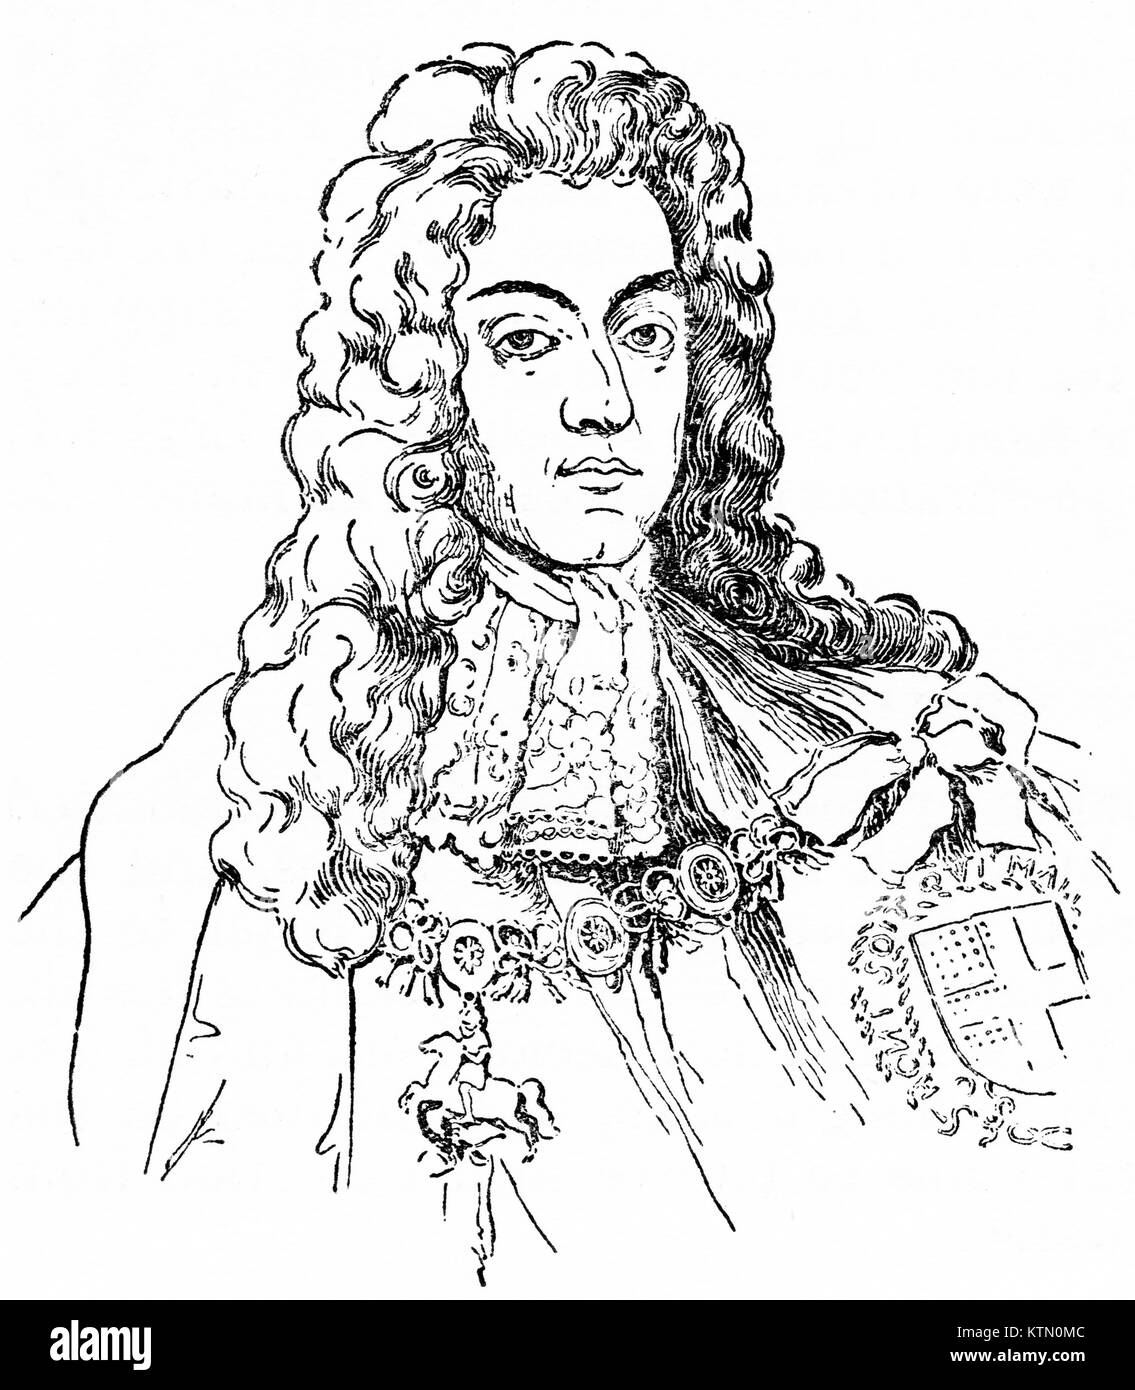 Engraving of King William III, 1650-1701 also known as William of Orange. From an original engraving in the Historian's History of the World, 1908 Stock Photo